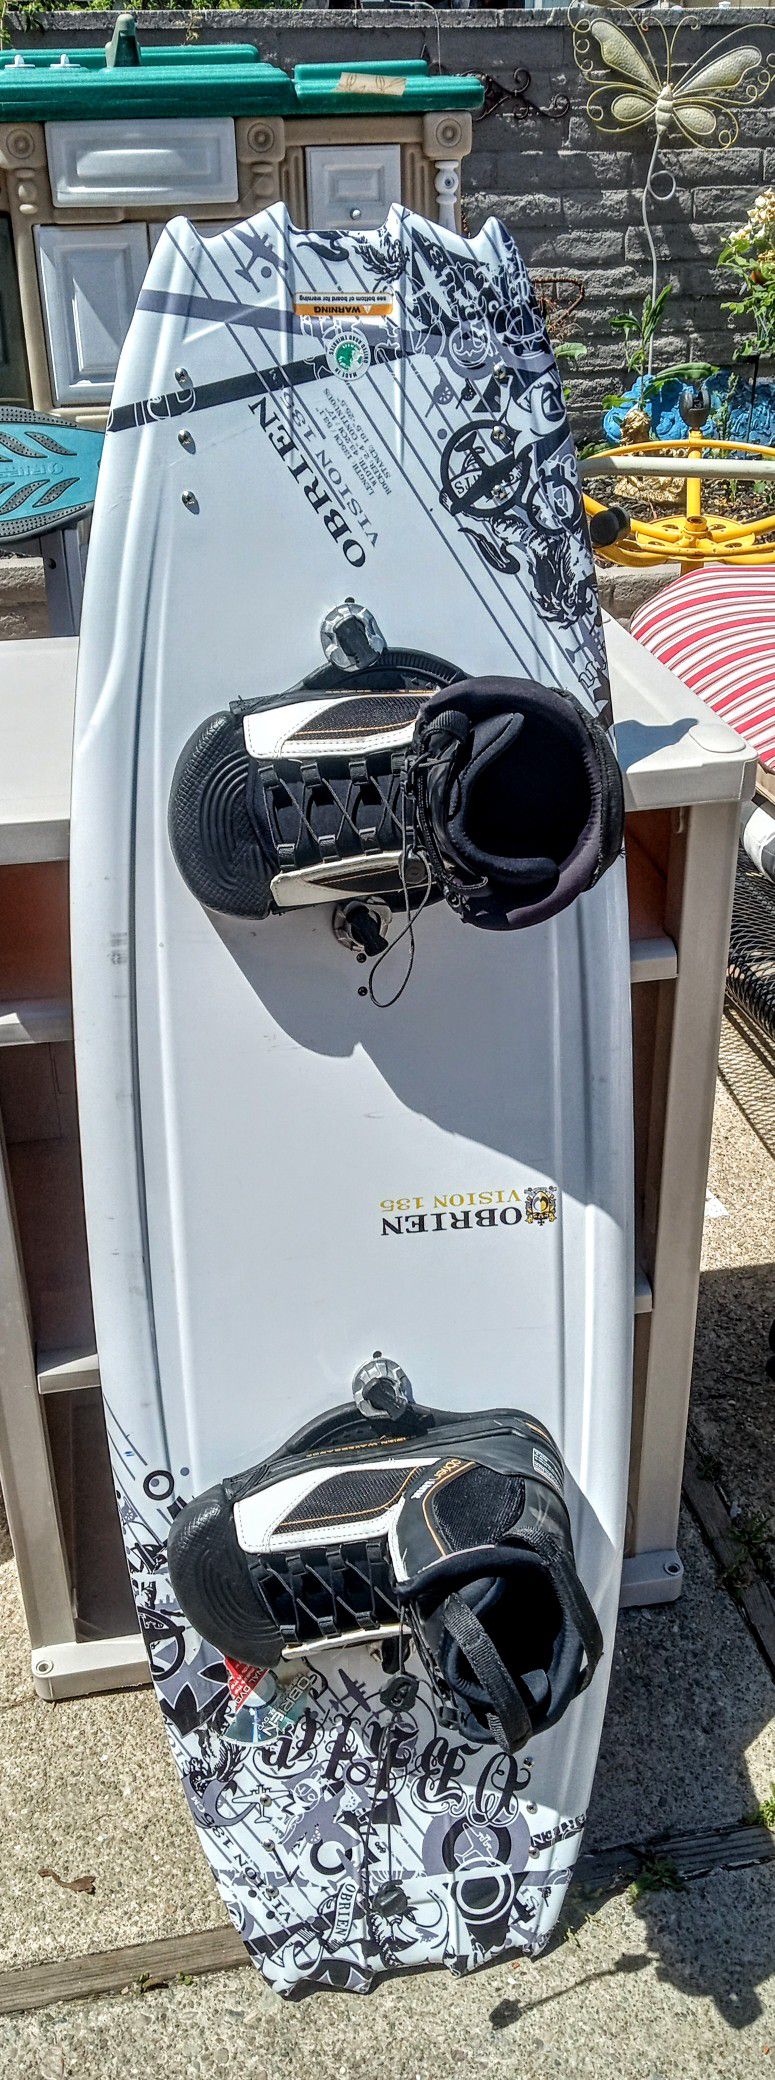 O'BRIEN VISION 121 WAKEBOARD WITH BINDINGS 